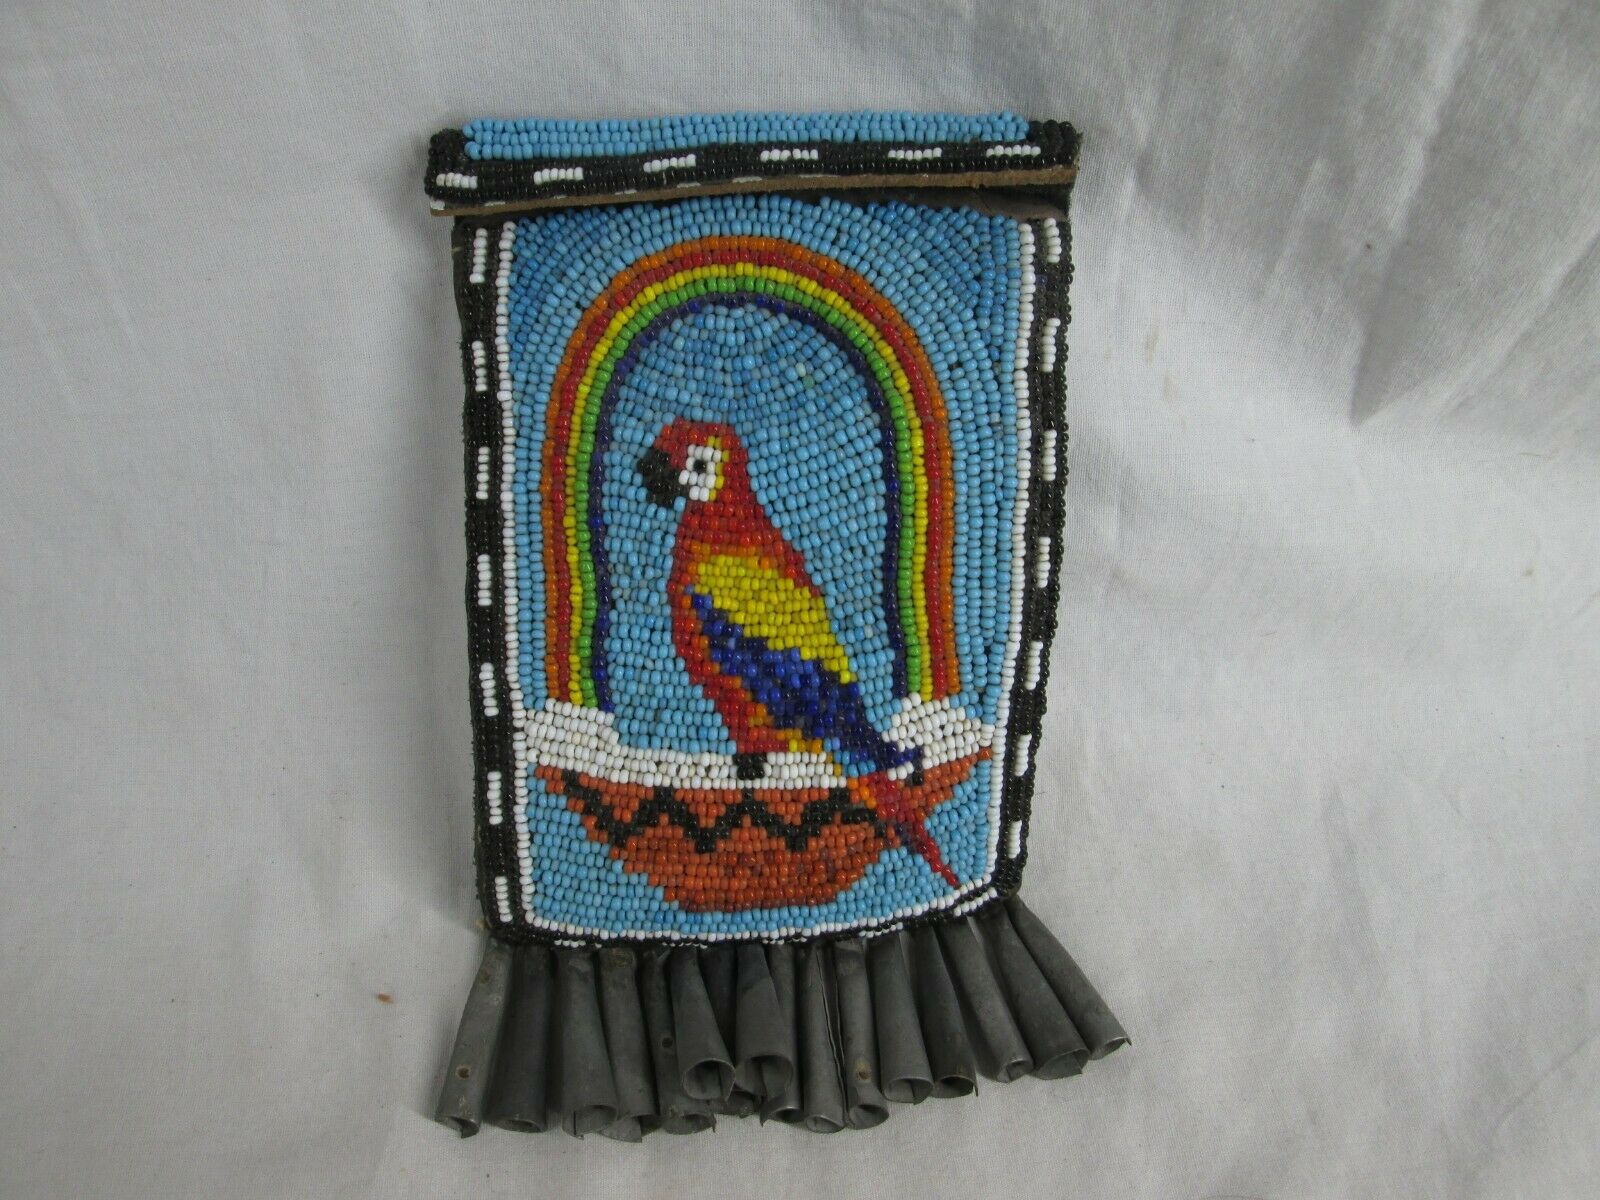 Antique Or Vintage Native American Beaded Parrot Theme Leather Bag / Pouch